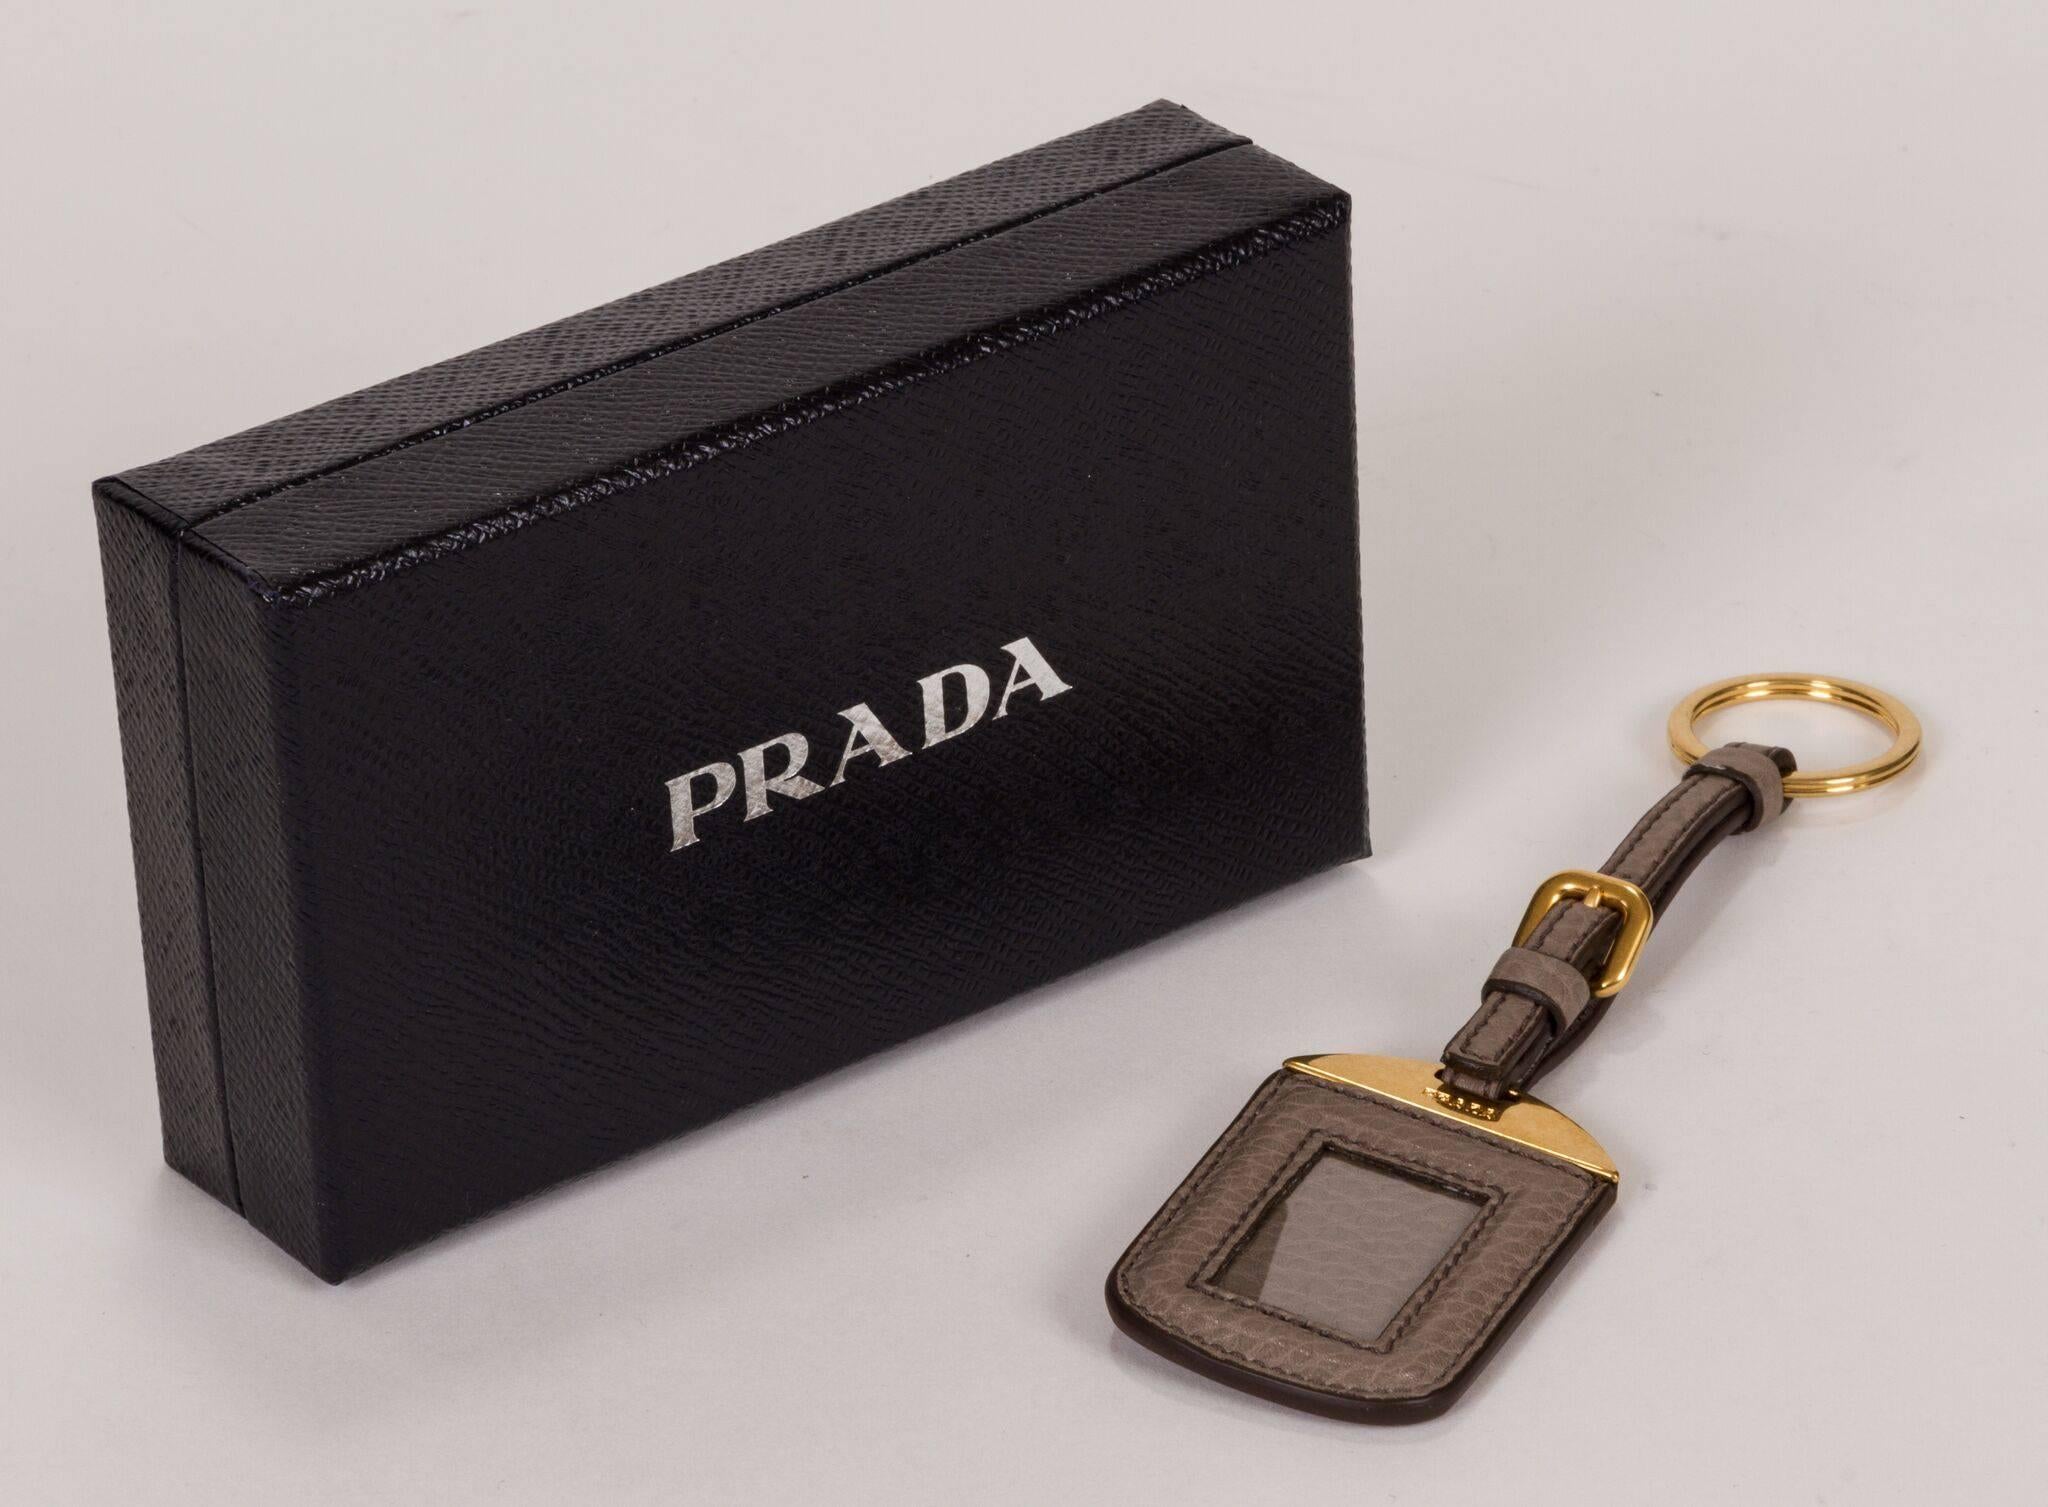 New 2014 Prada keychain and name tag holder. Gray leather and gold tone hardware. Comes with original box and tag.
